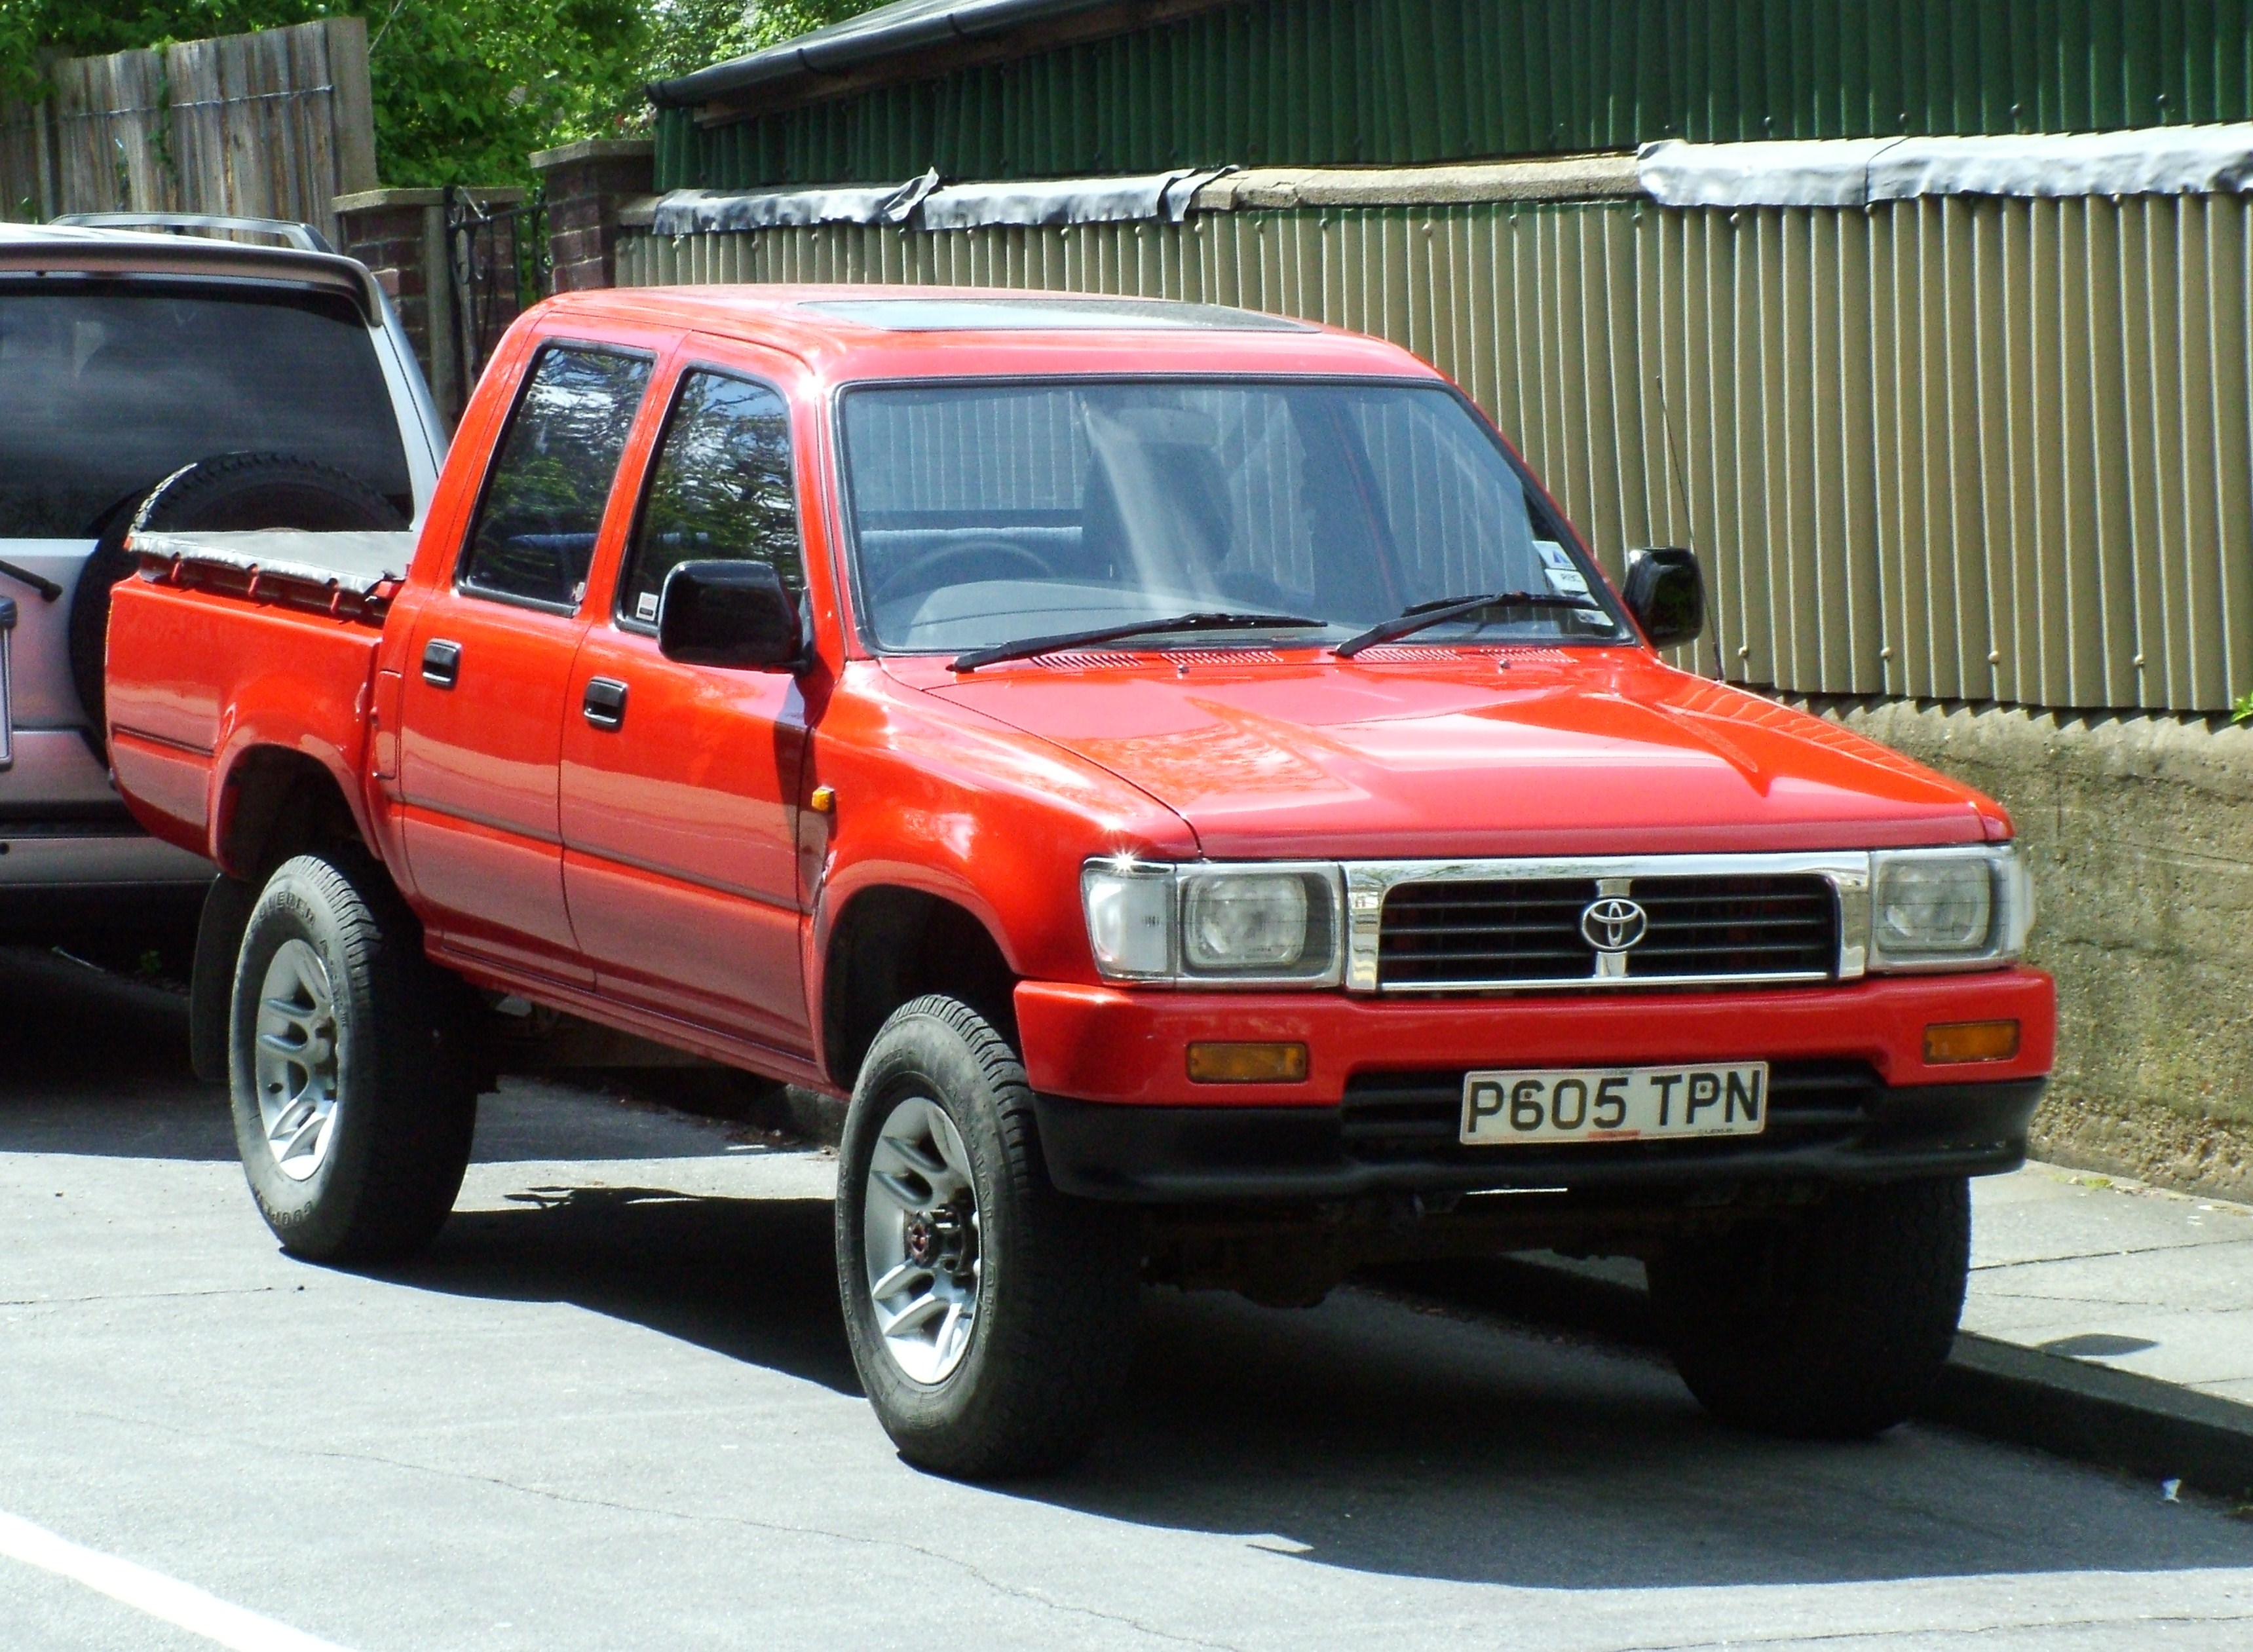 Toyota Hilux 4wd | Flickr - Photo Sharing!